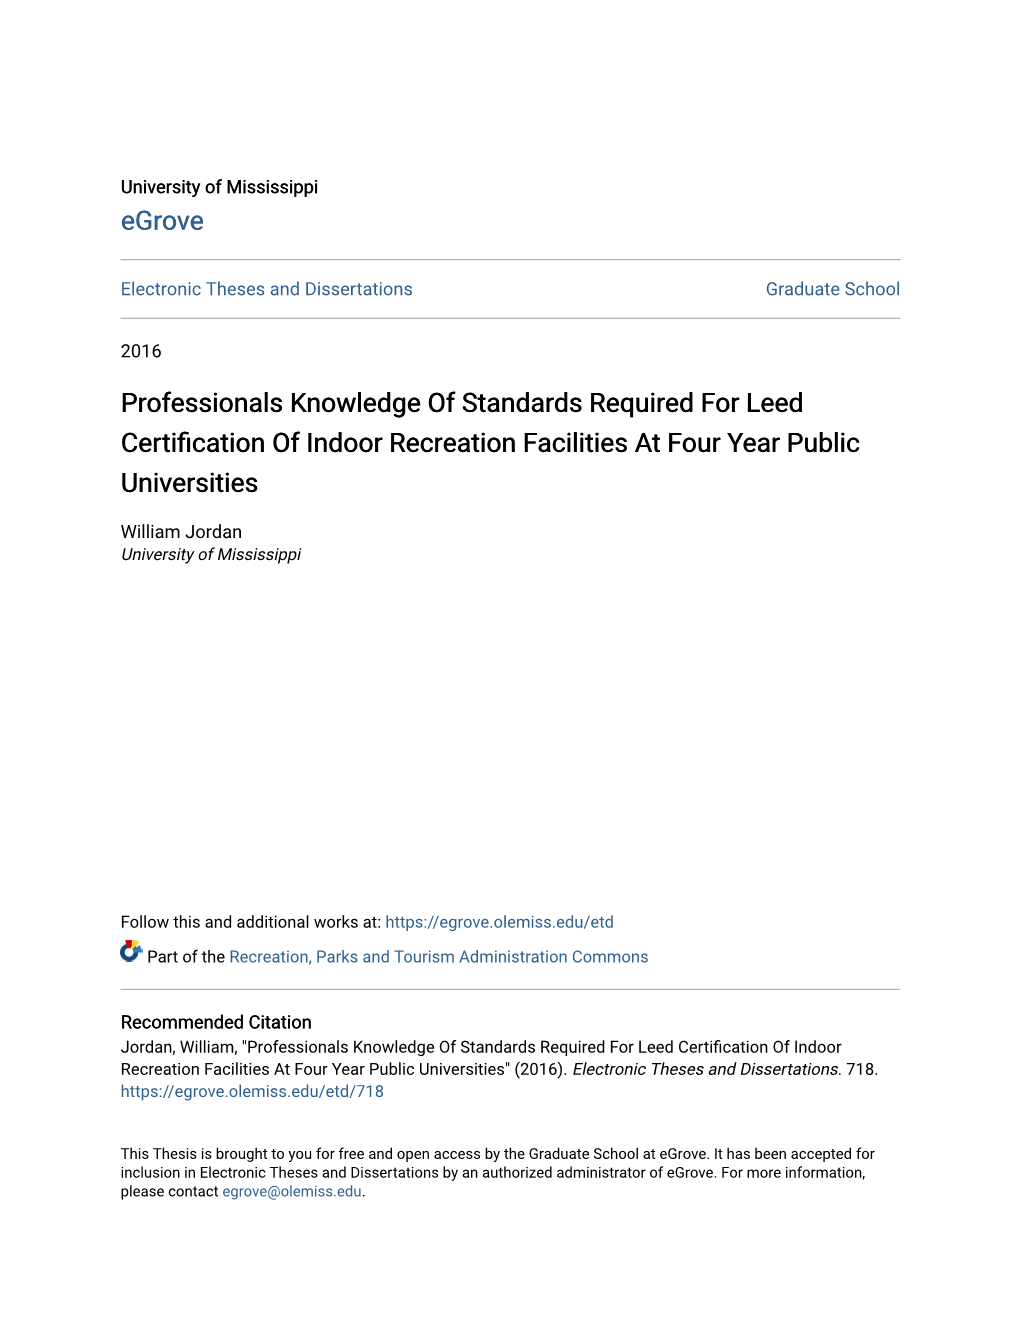 Professionals Knowledge of Standards Required for Leed Certification of Indoor Recreation Facilities at Four Year Public Universities